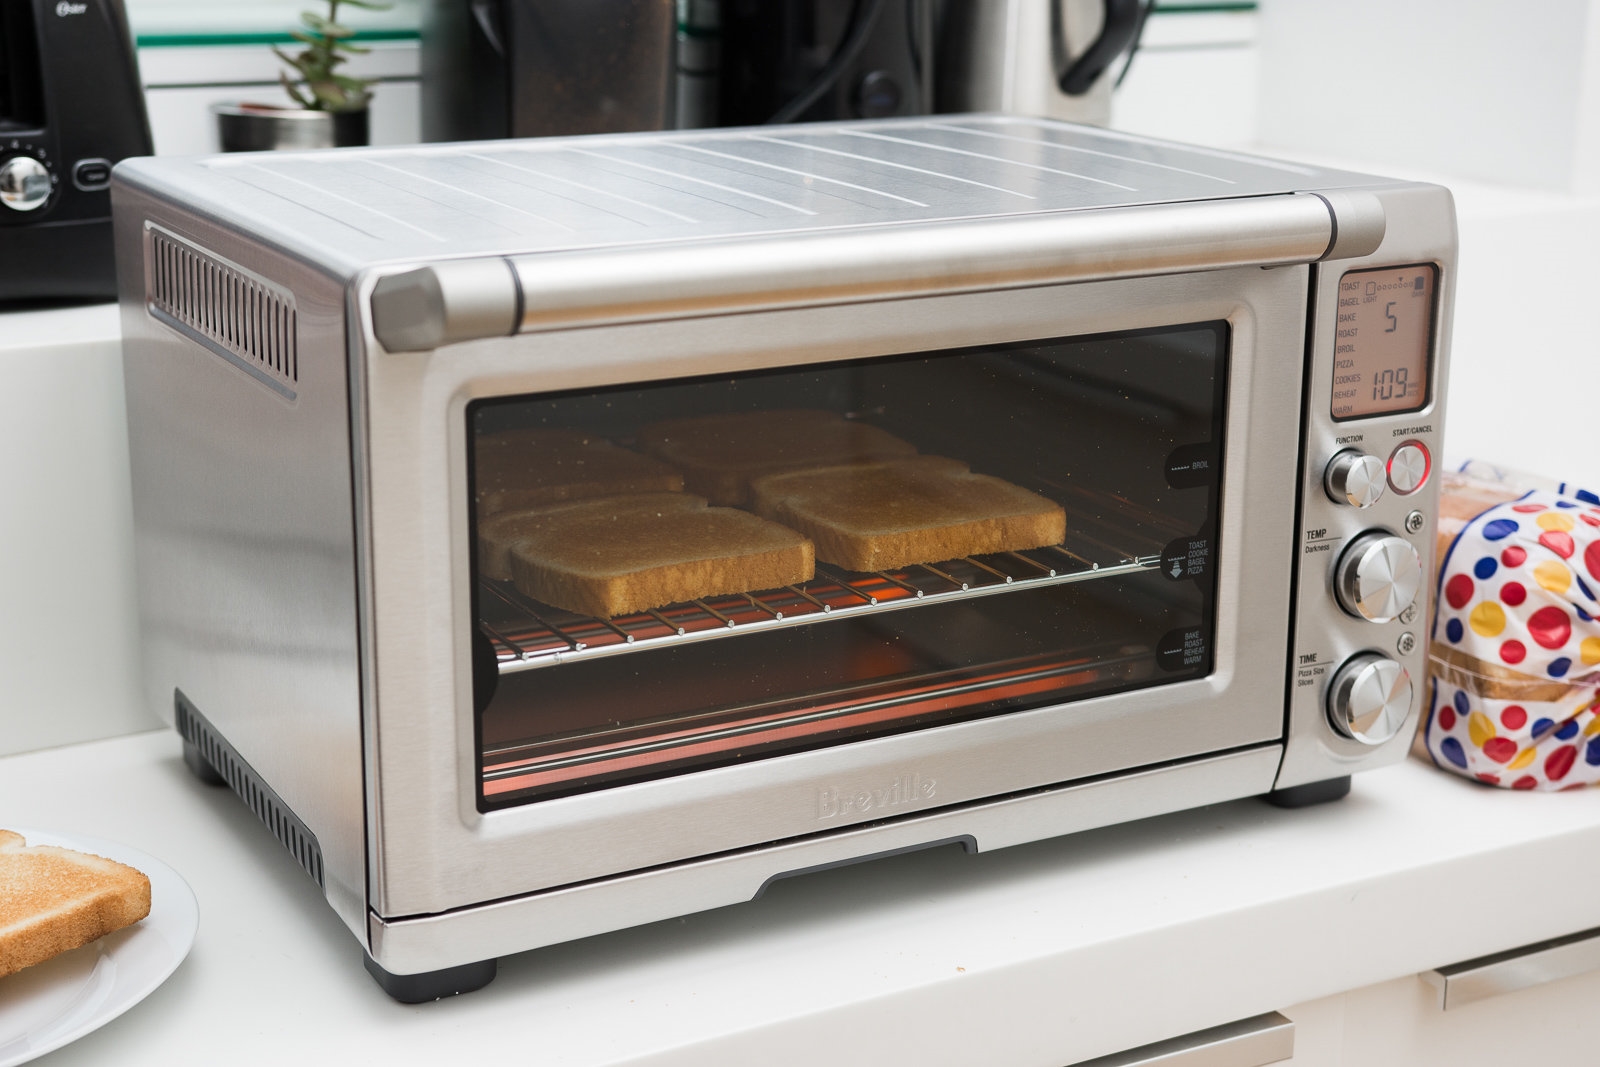 The best toaster oven | DeviceDaily.com